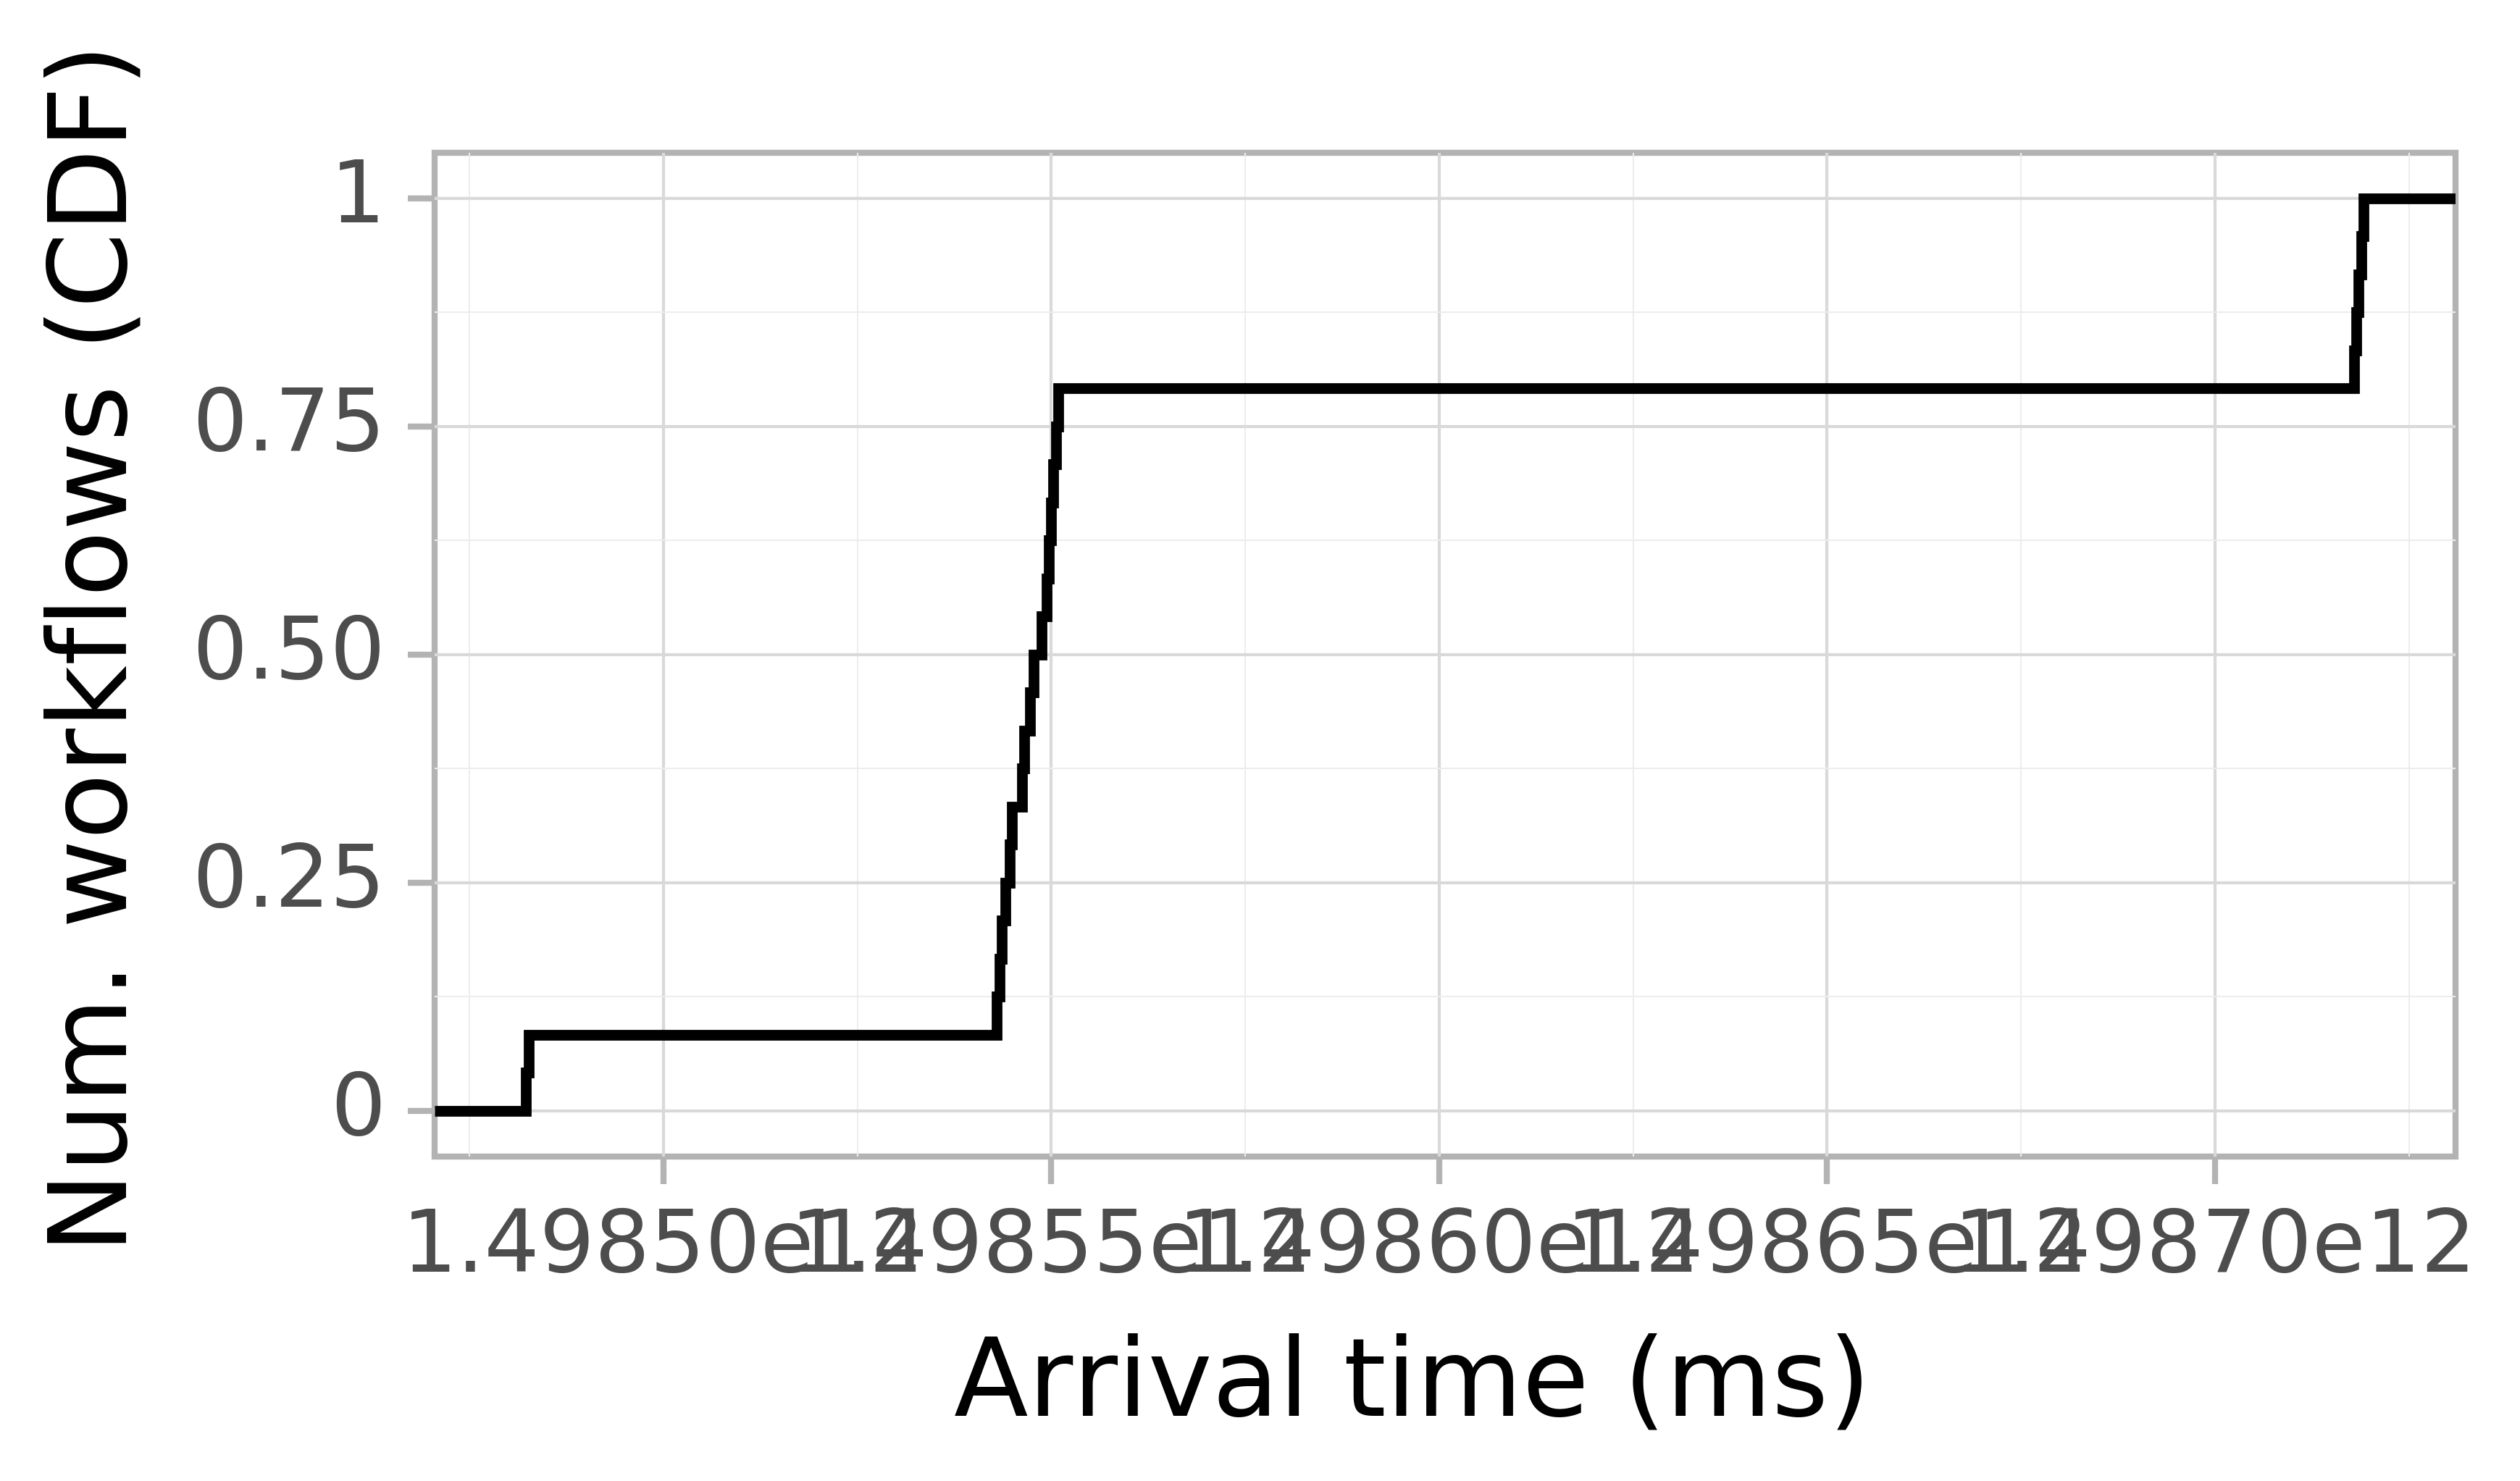 Job arrival CDF graph for the askalon-new_ee31 trace.